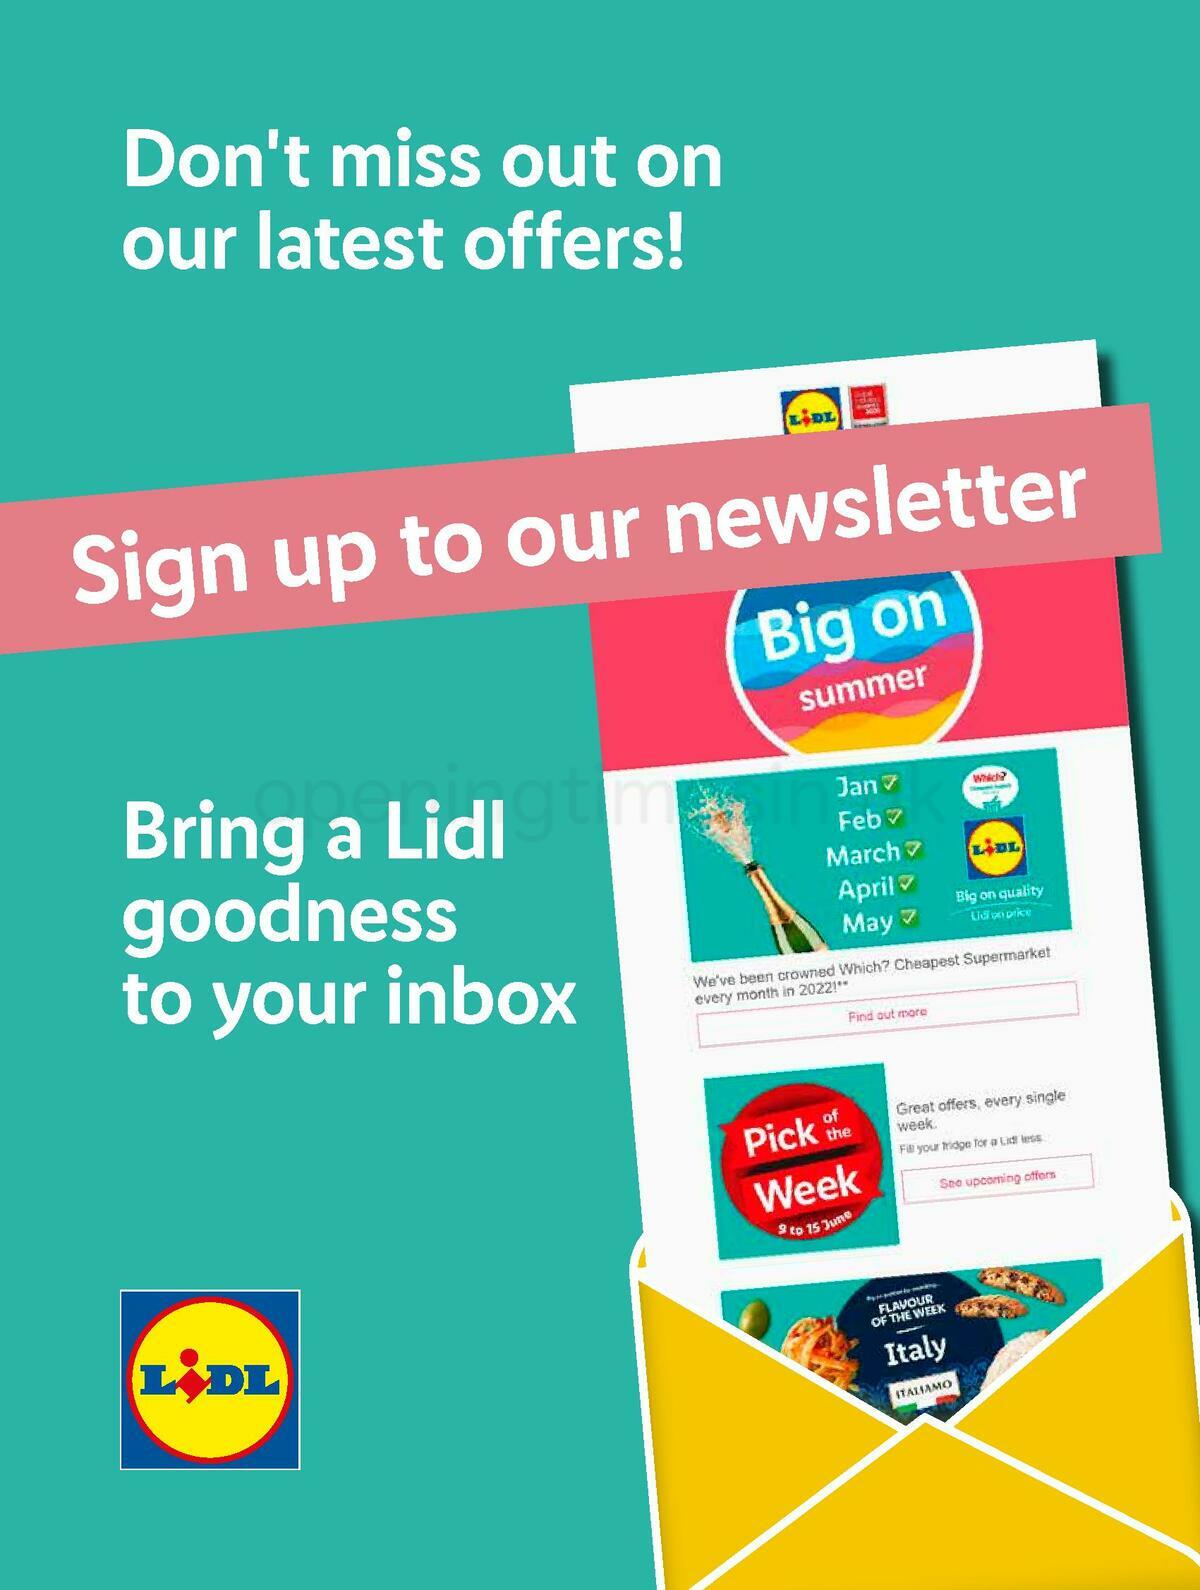 LIDL Offers from 9 February